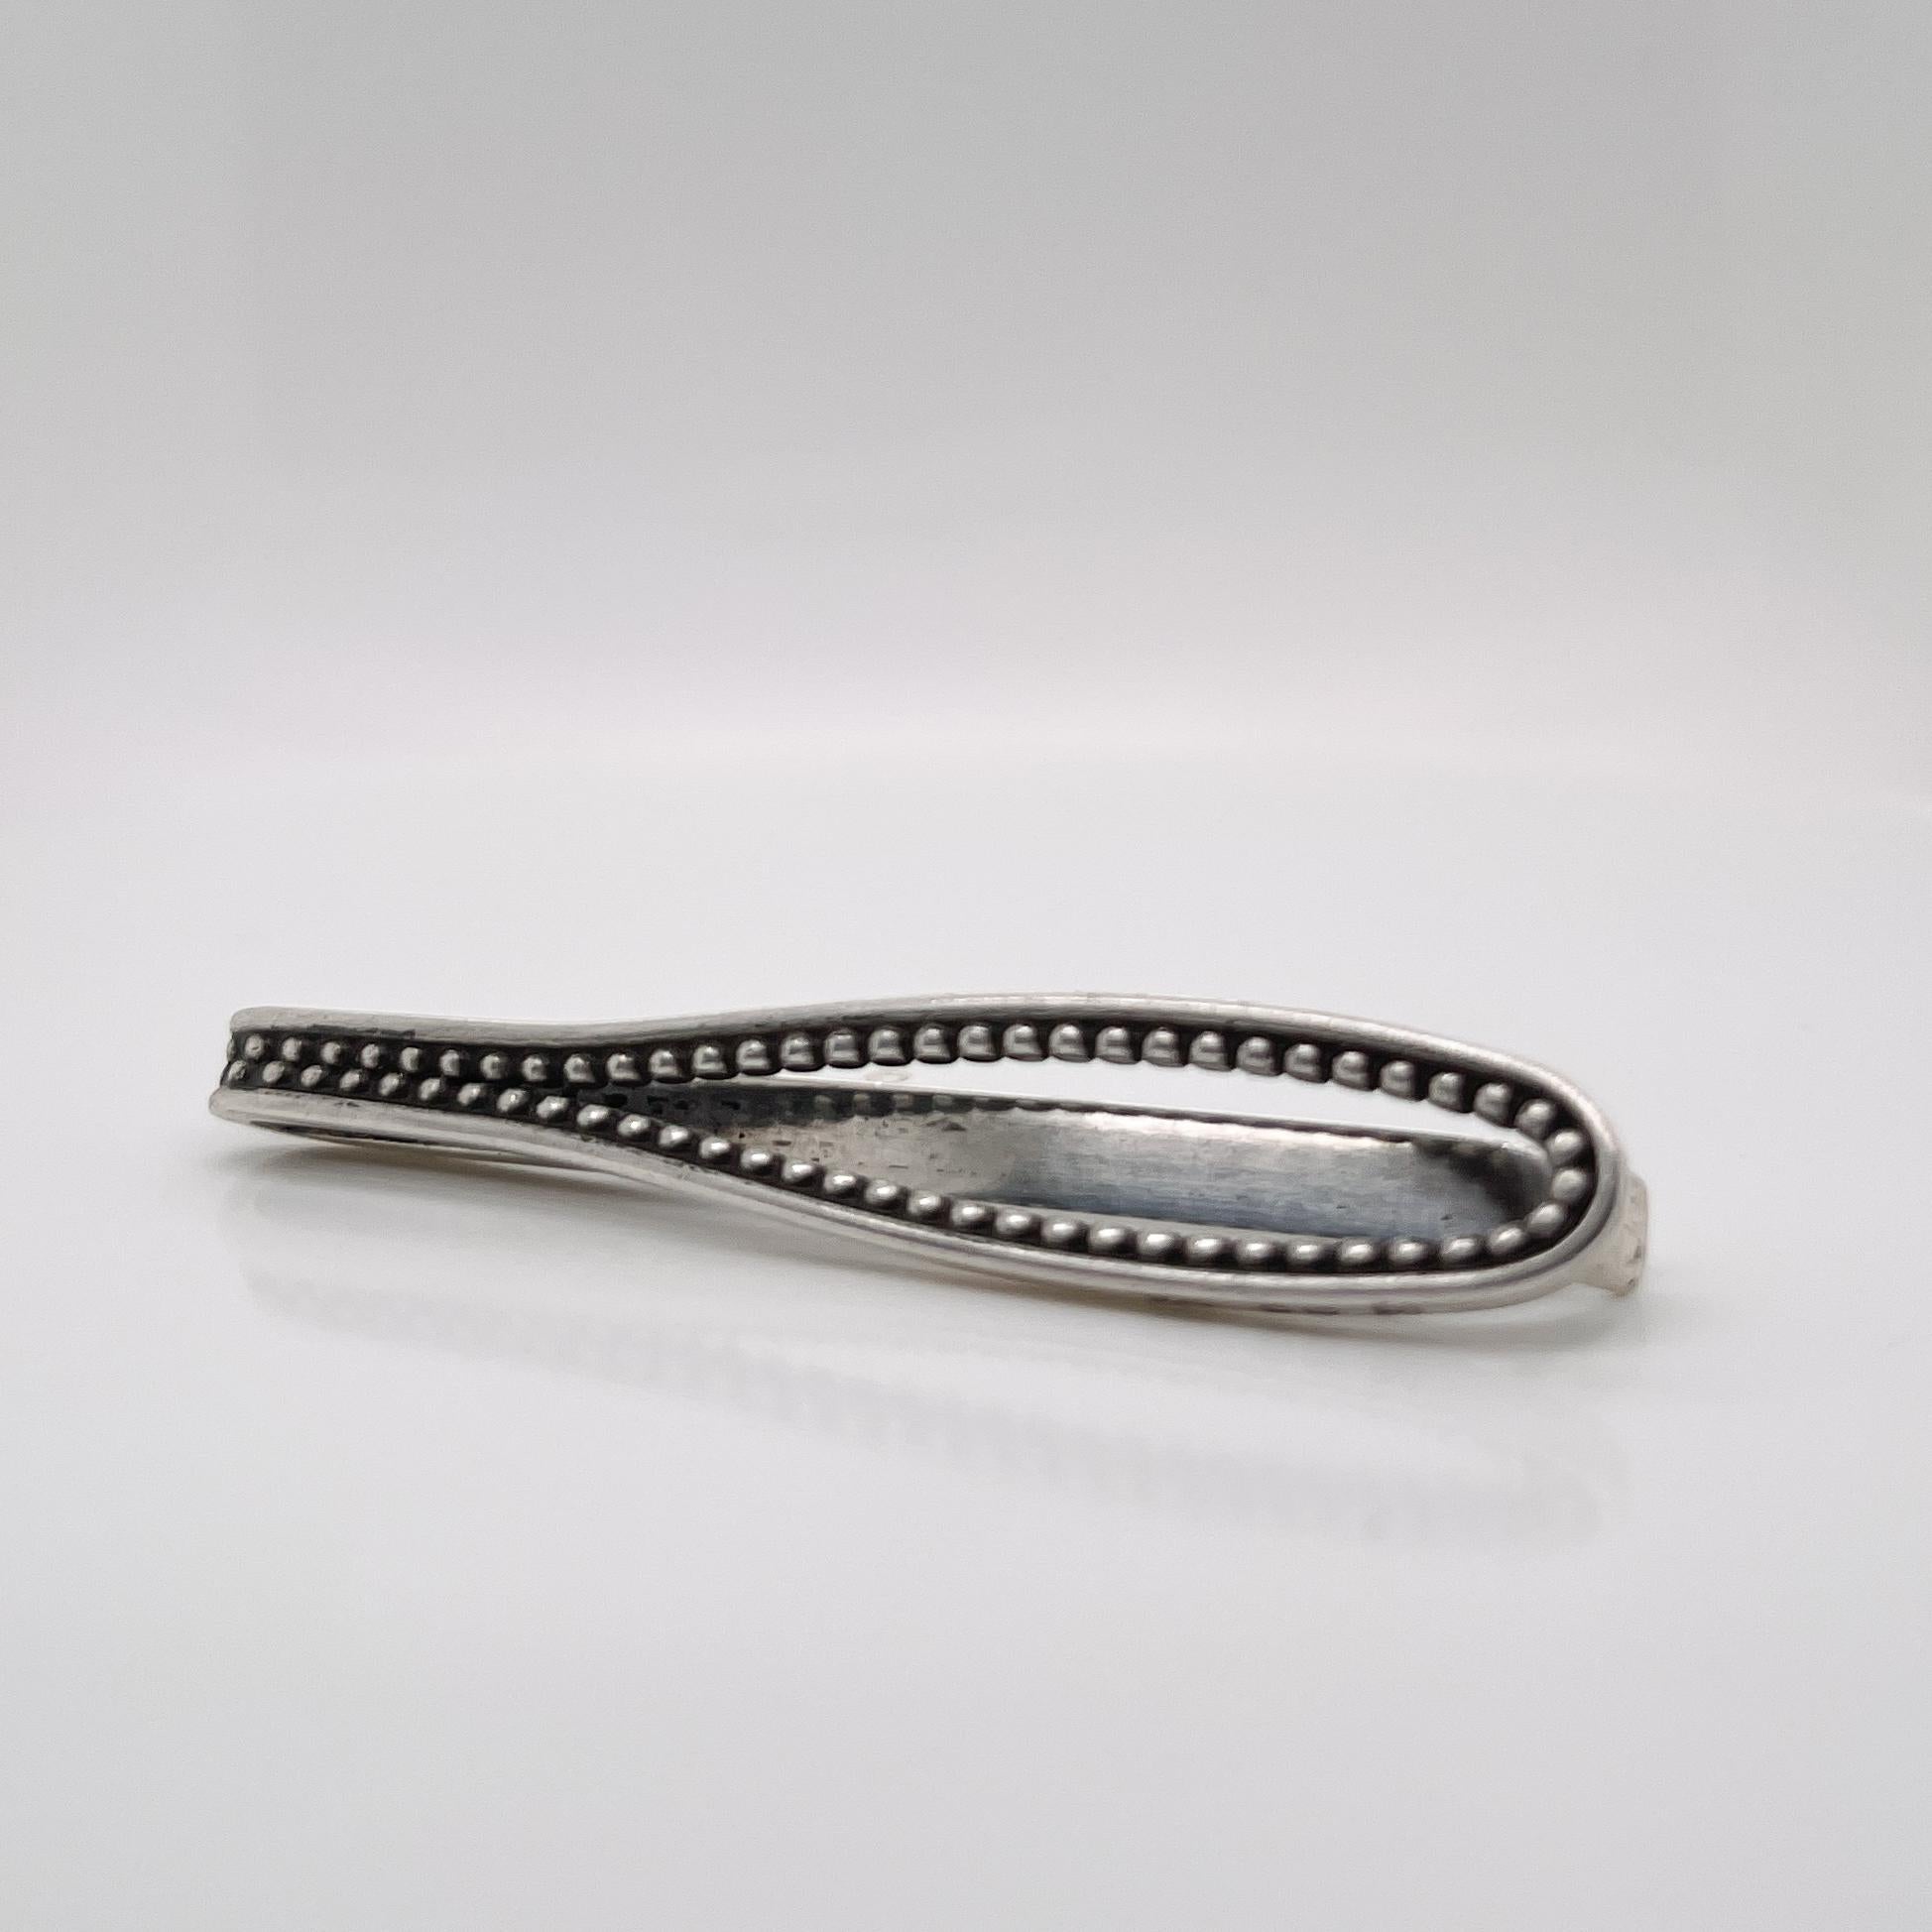 A very fine Georg Jensen sterling silver tie bar or money clip.

With an oval 